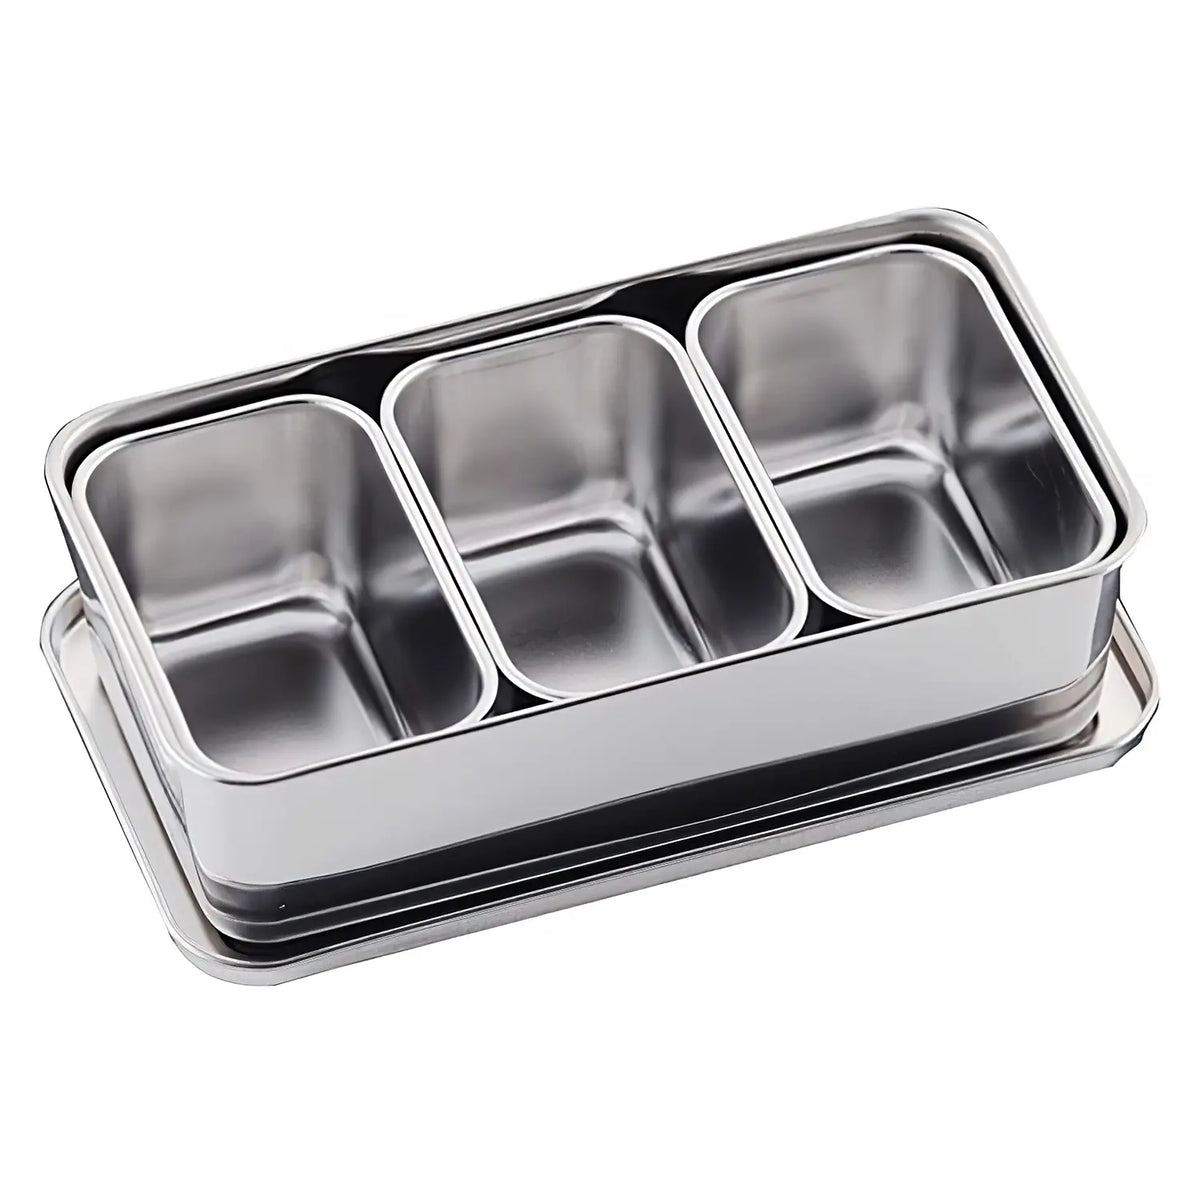 Mise en Place Yakumi Pan - 4 Compartment square with Lid